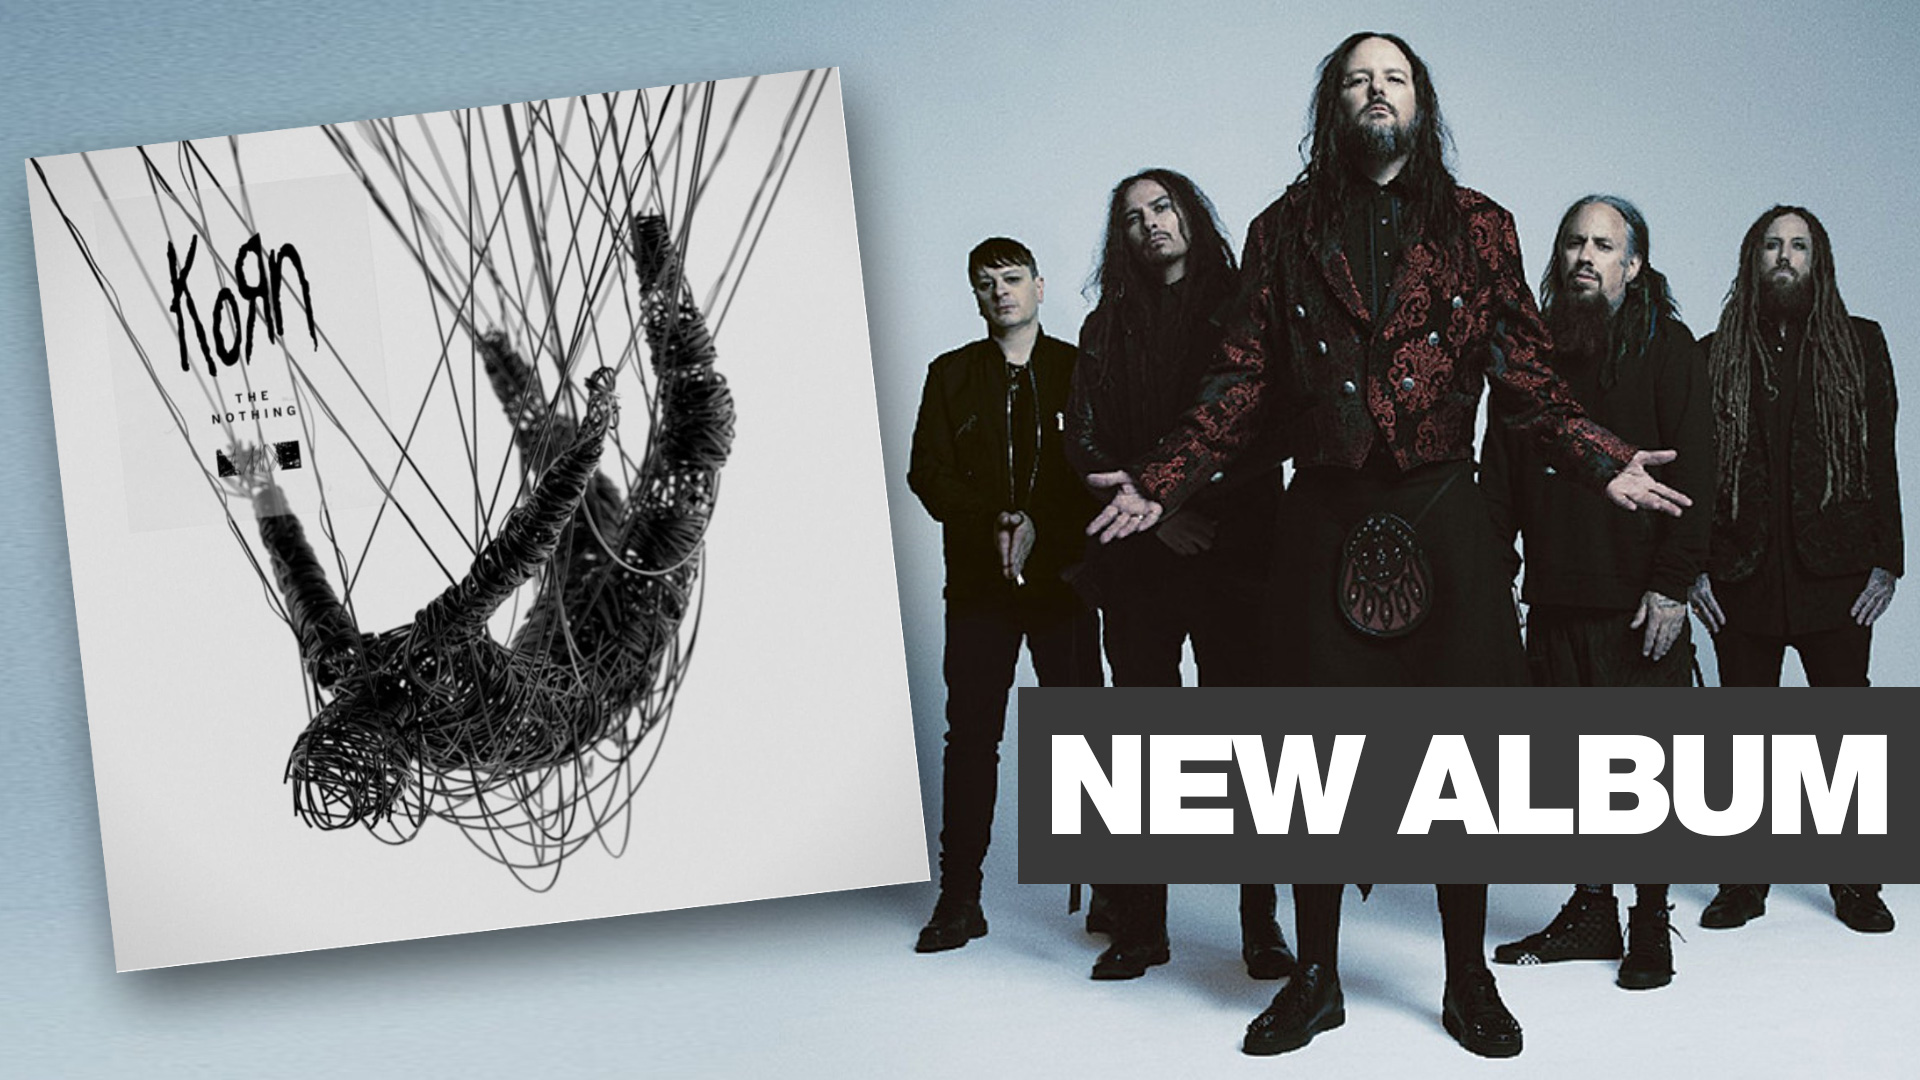 Korn's new album "THE NOTHING" is now available everywhere! Adventure